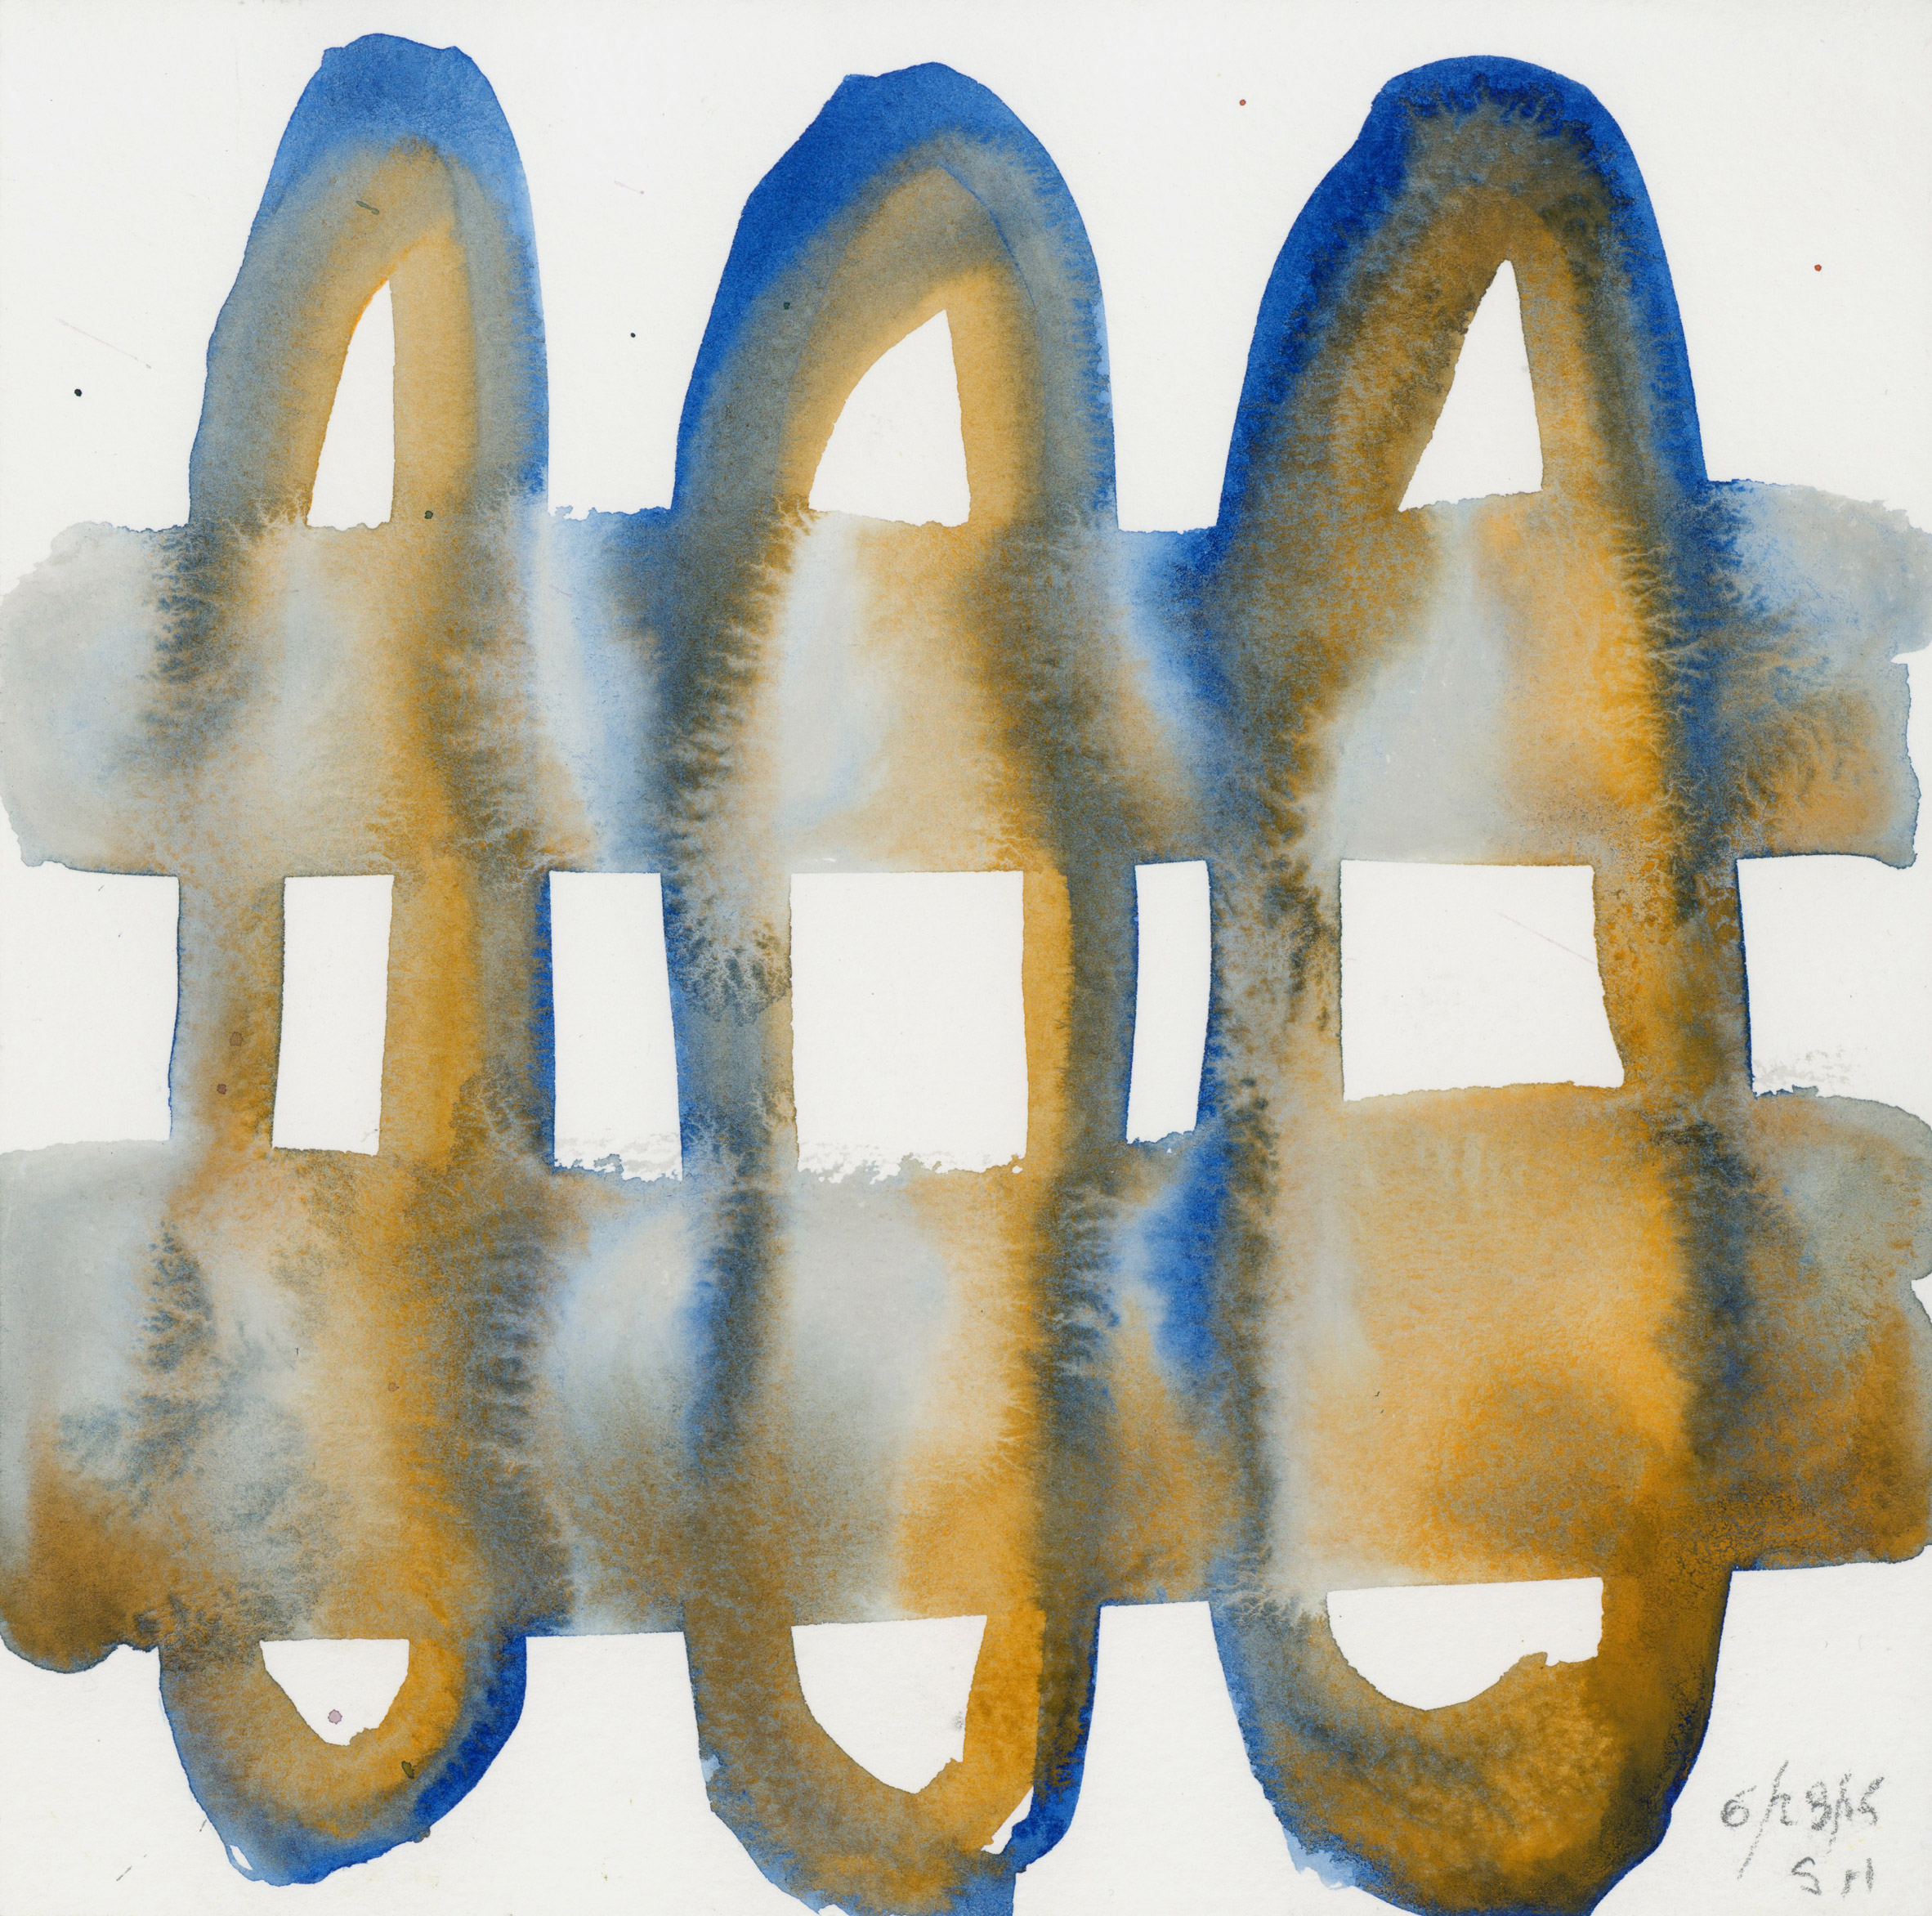 Steven Holl's Untitled 1 watercolour is for sale as part of the Architects for Beirut charity auction